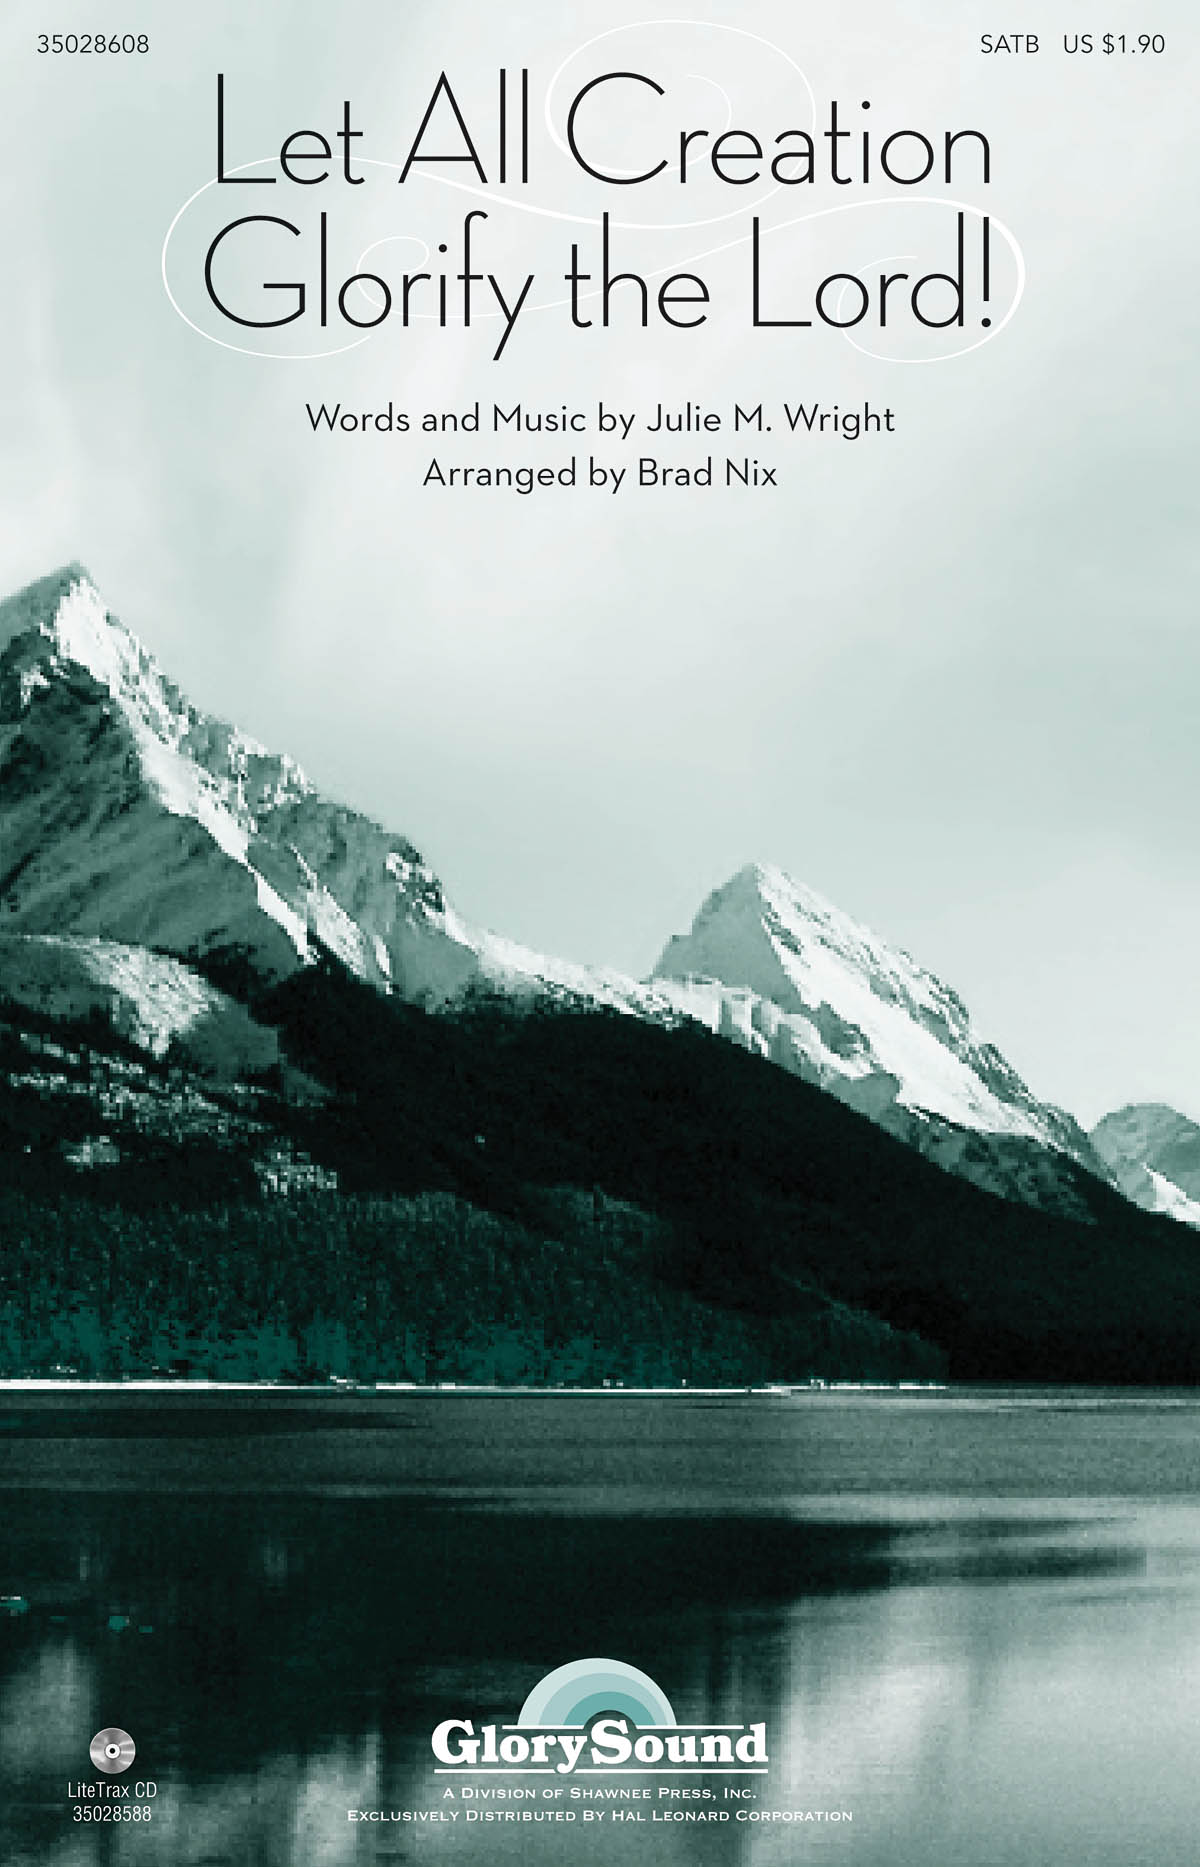 Julie M. Wright: Let All Creation Glorify the Lord: SATB: Vocal Score